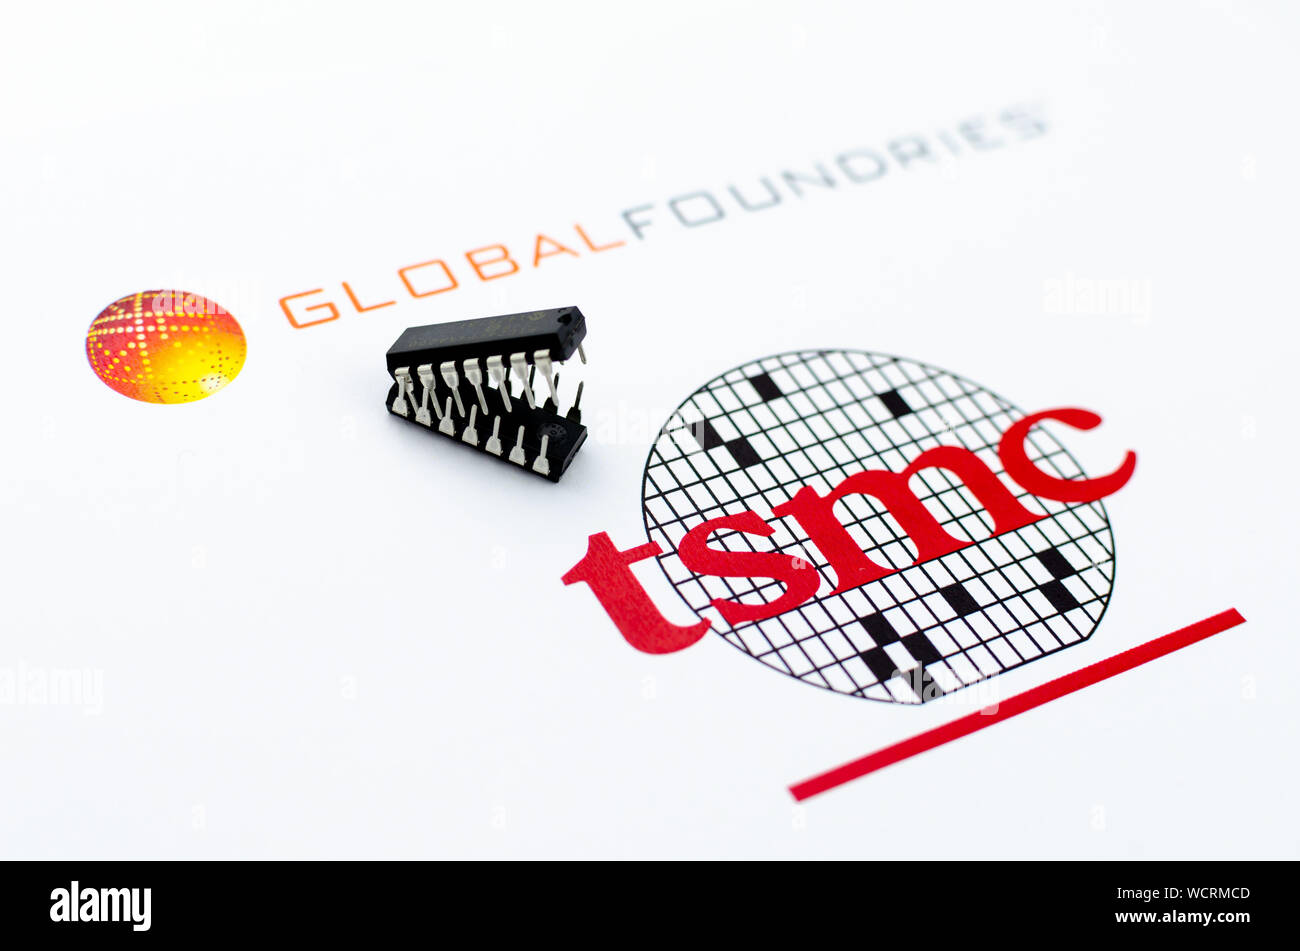 GLOBAL FOUNDRIES vs. TSMC. Printed logos of semiconductor companies and two microchips in the shape of attacking jaws. Conceptual photo. Stock Photo